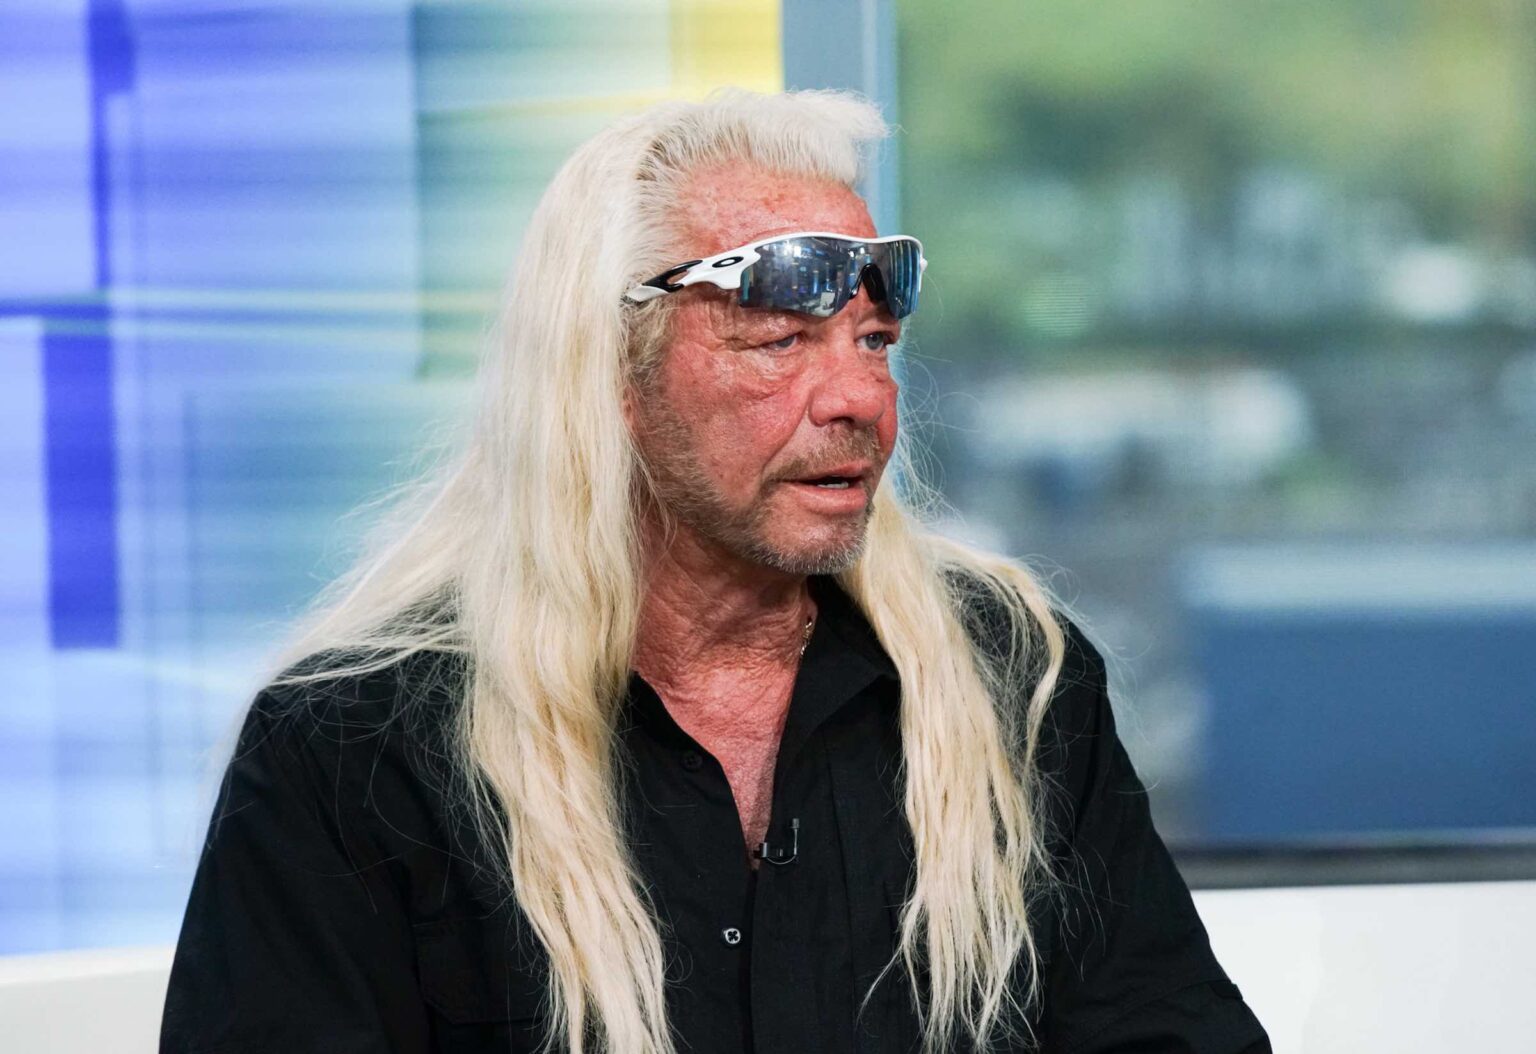 Dog the bounty hunter has joined the search for Brian Laundrie. Uncover the story and see what new discoveries the reality star has made to the case.